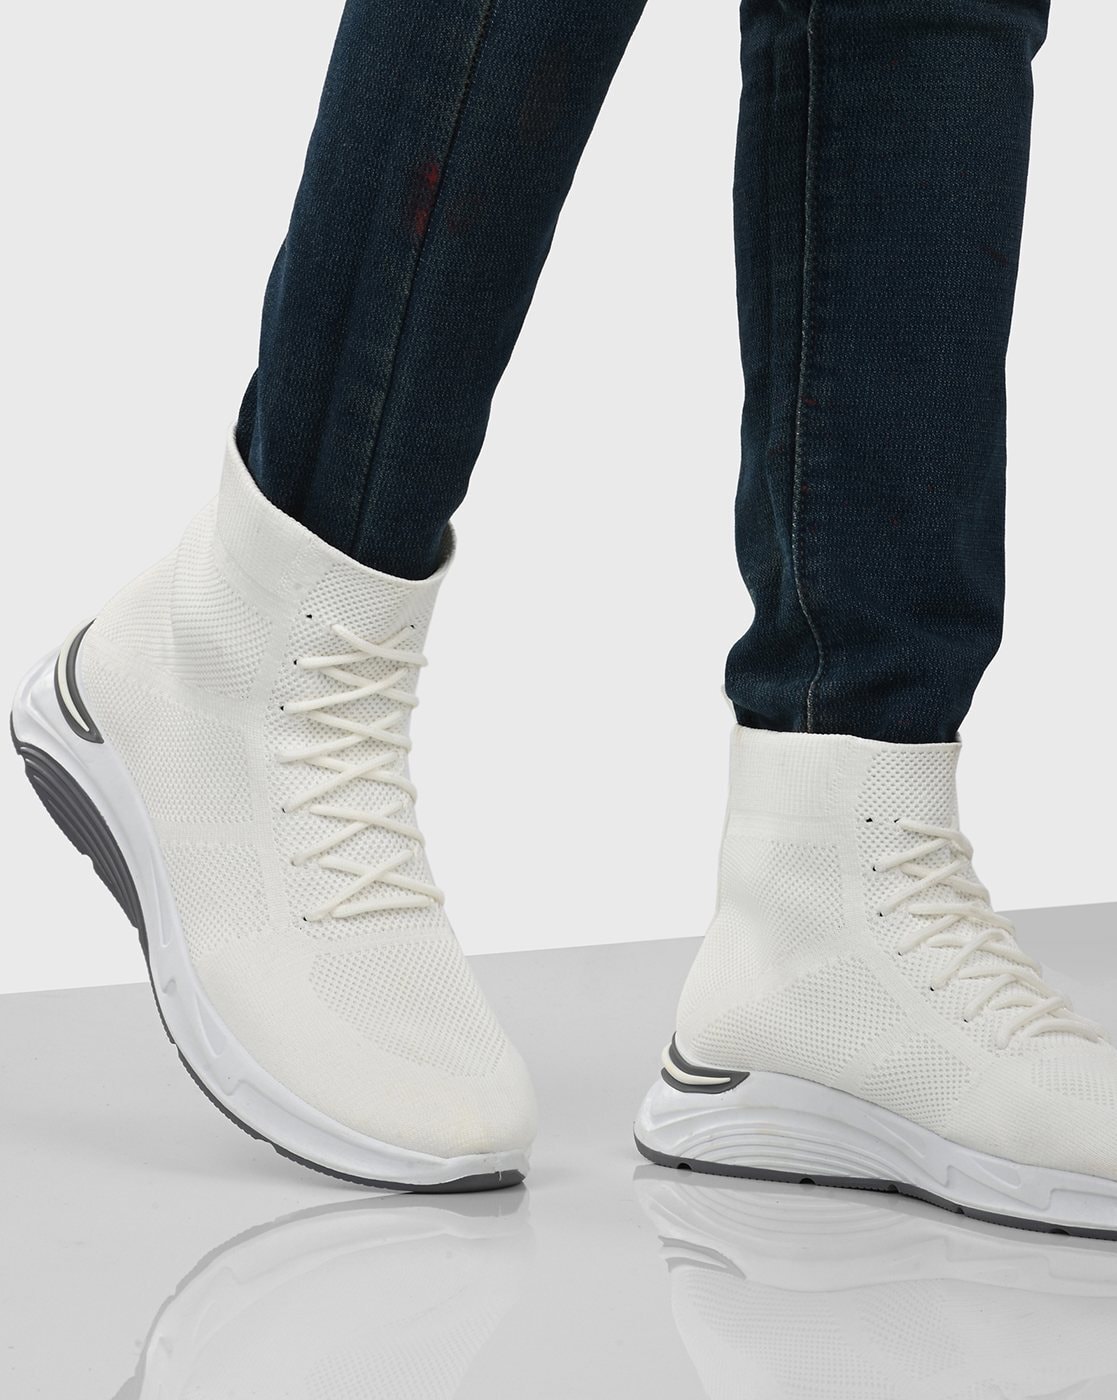 Shoes (White) High Neck Sneakers